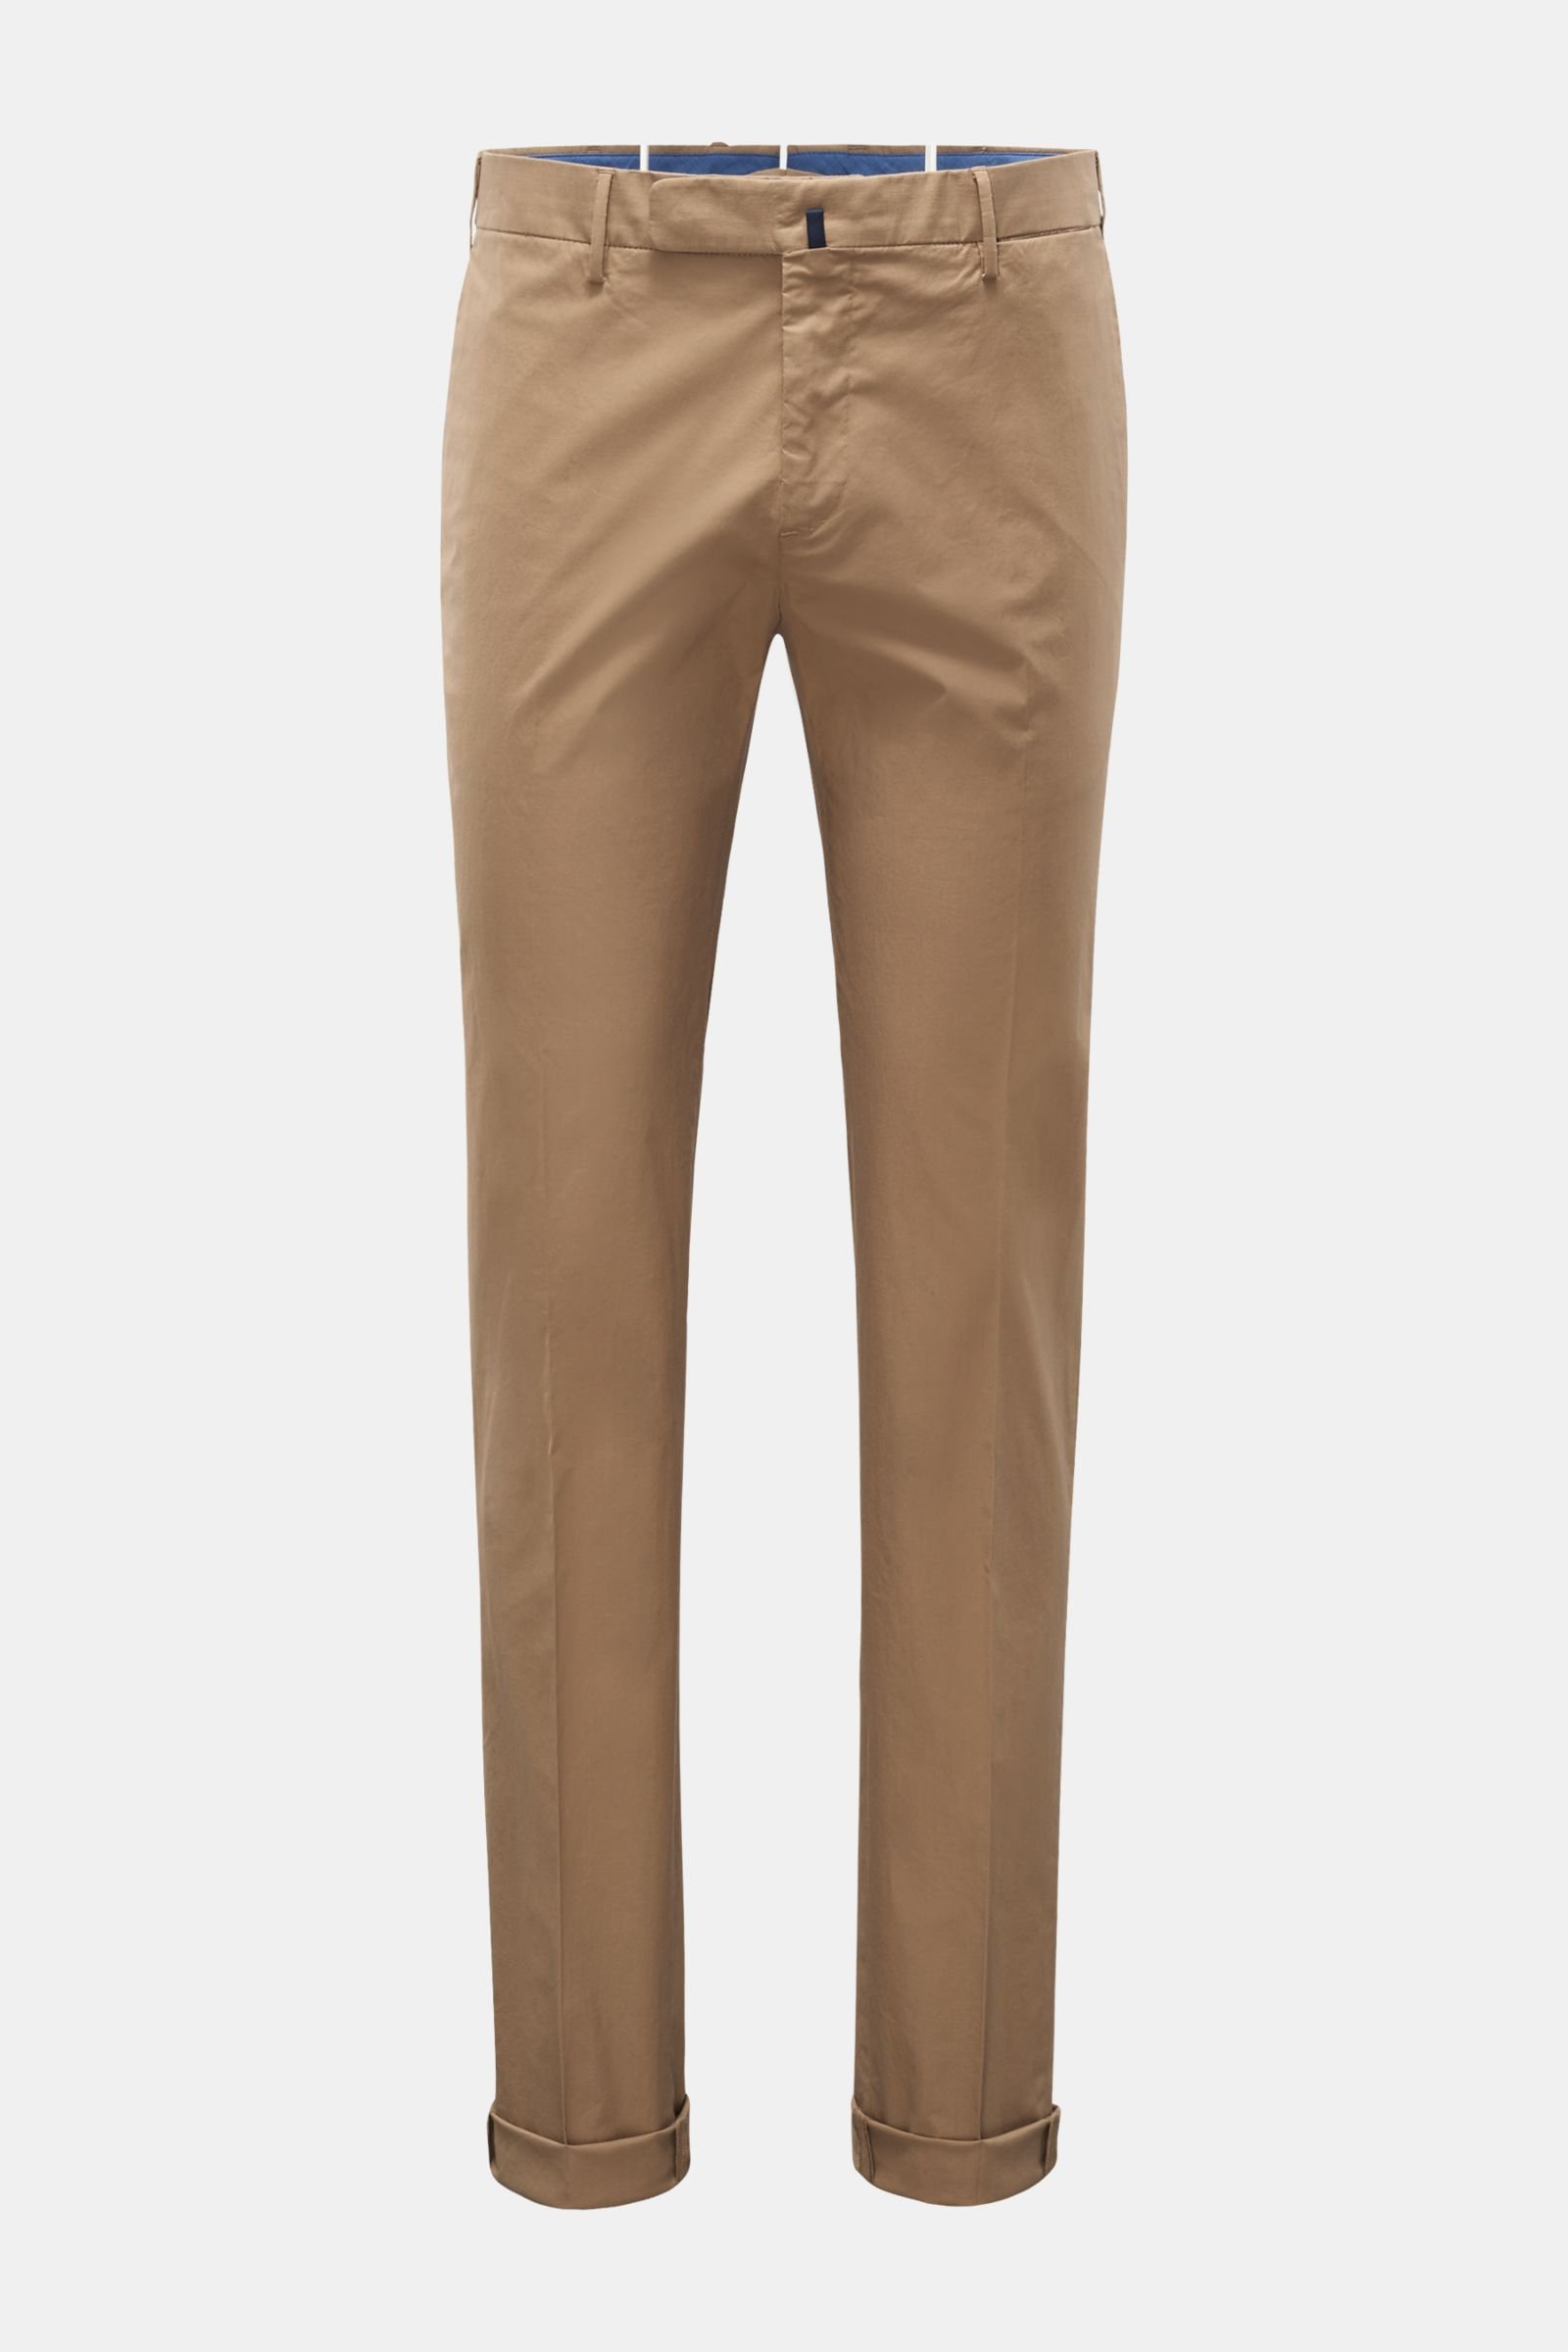 Cotton trousers light brown